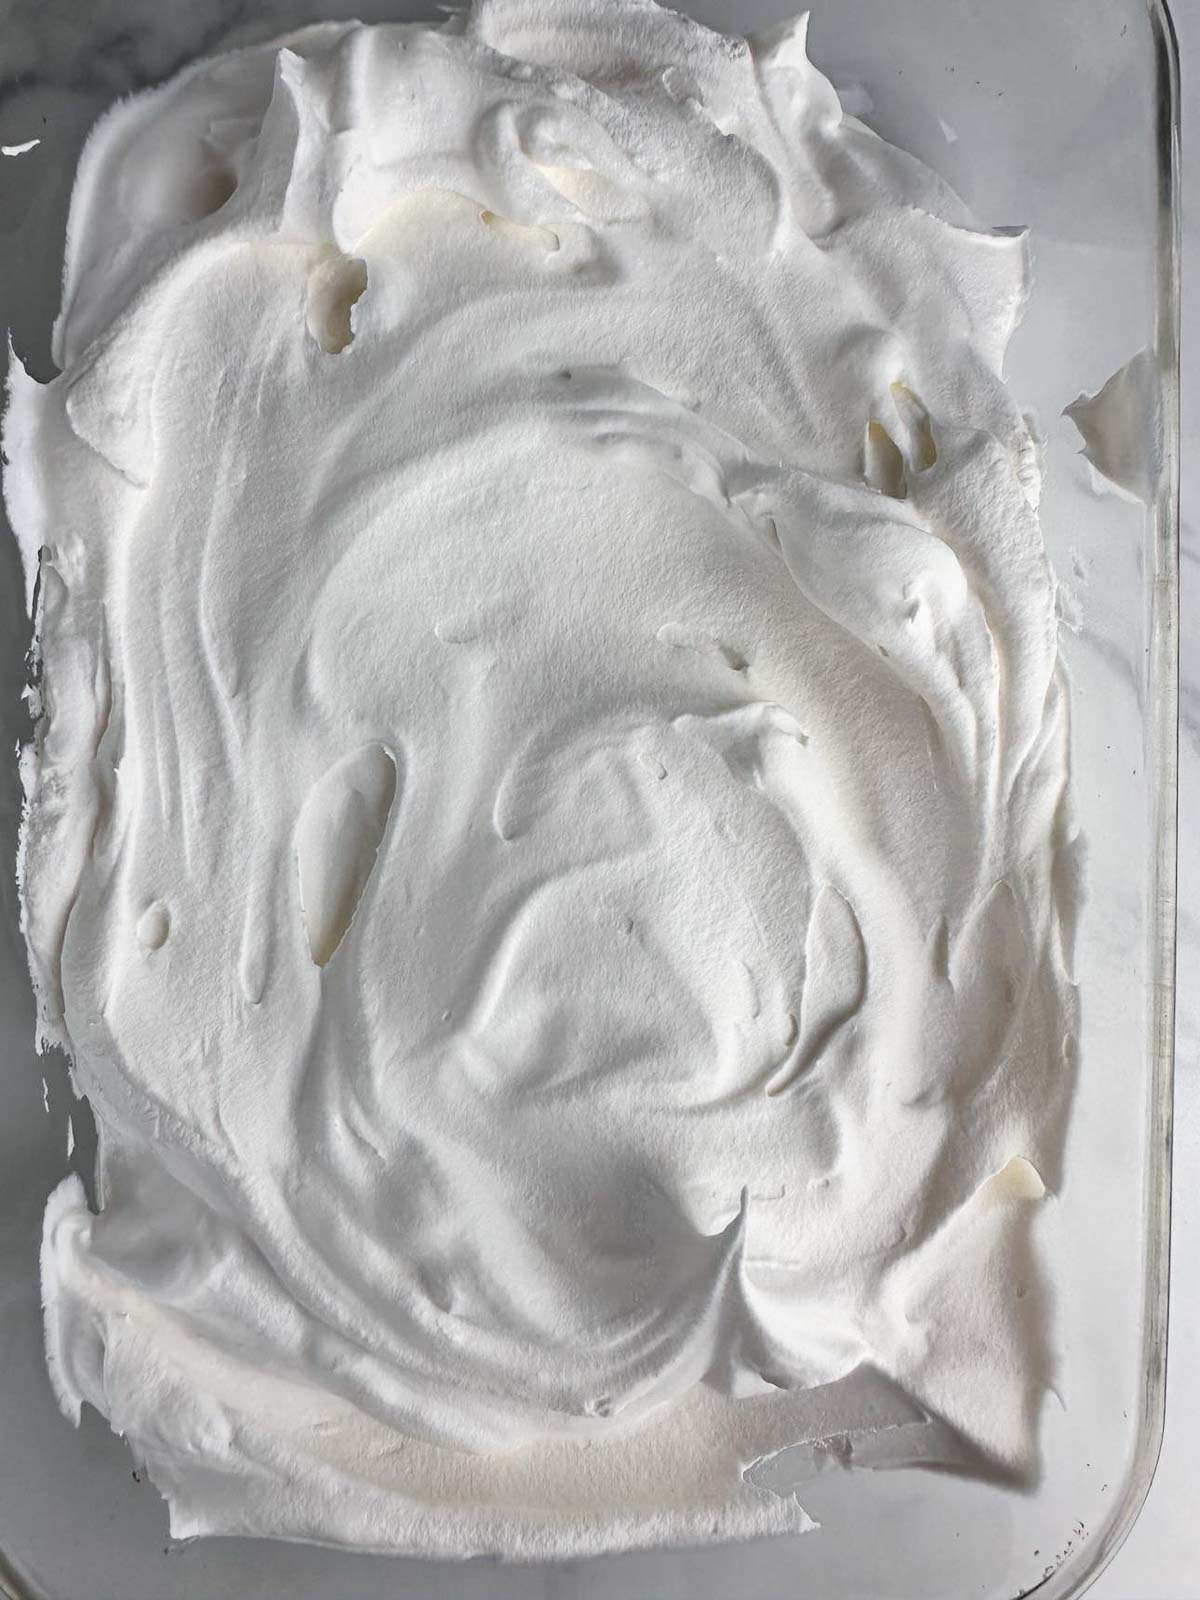 Spread the Cool Whip into a thick even layer in a casserole dish or tupperware container.